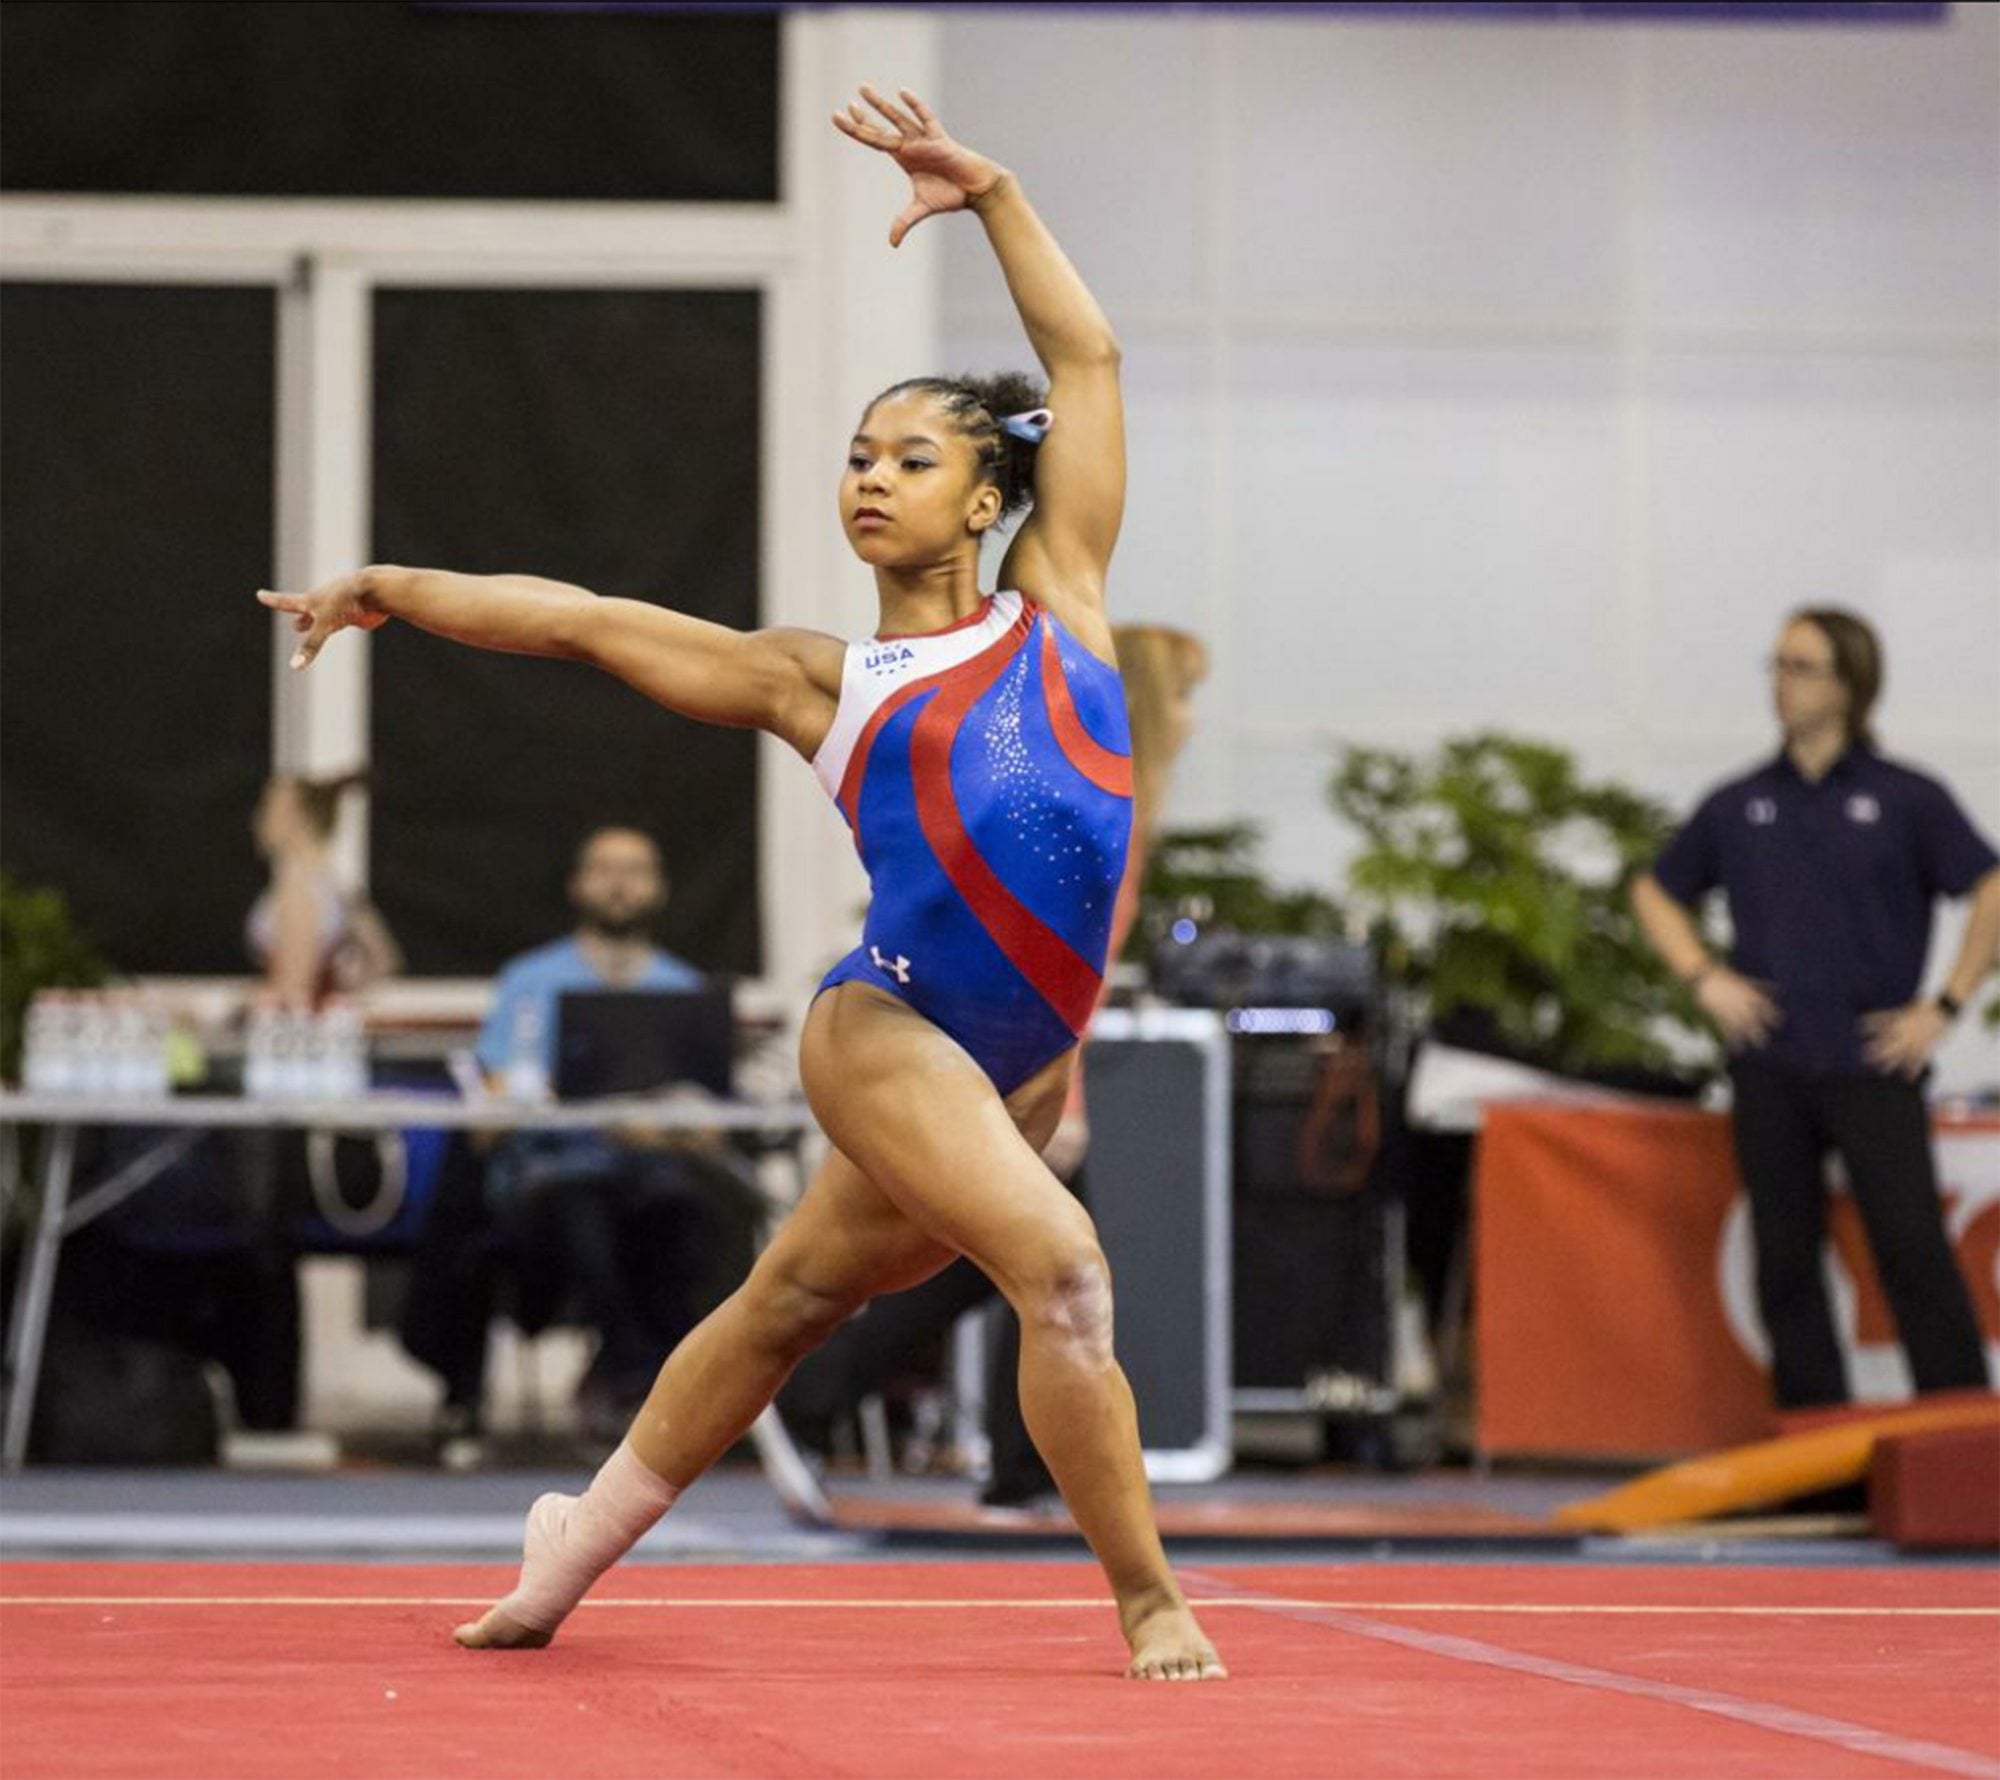 Jordan Chiles of Vancouver won her first international all-around title at the City of Jesolo Trophy meet March 19 in Jesolo, Italy.